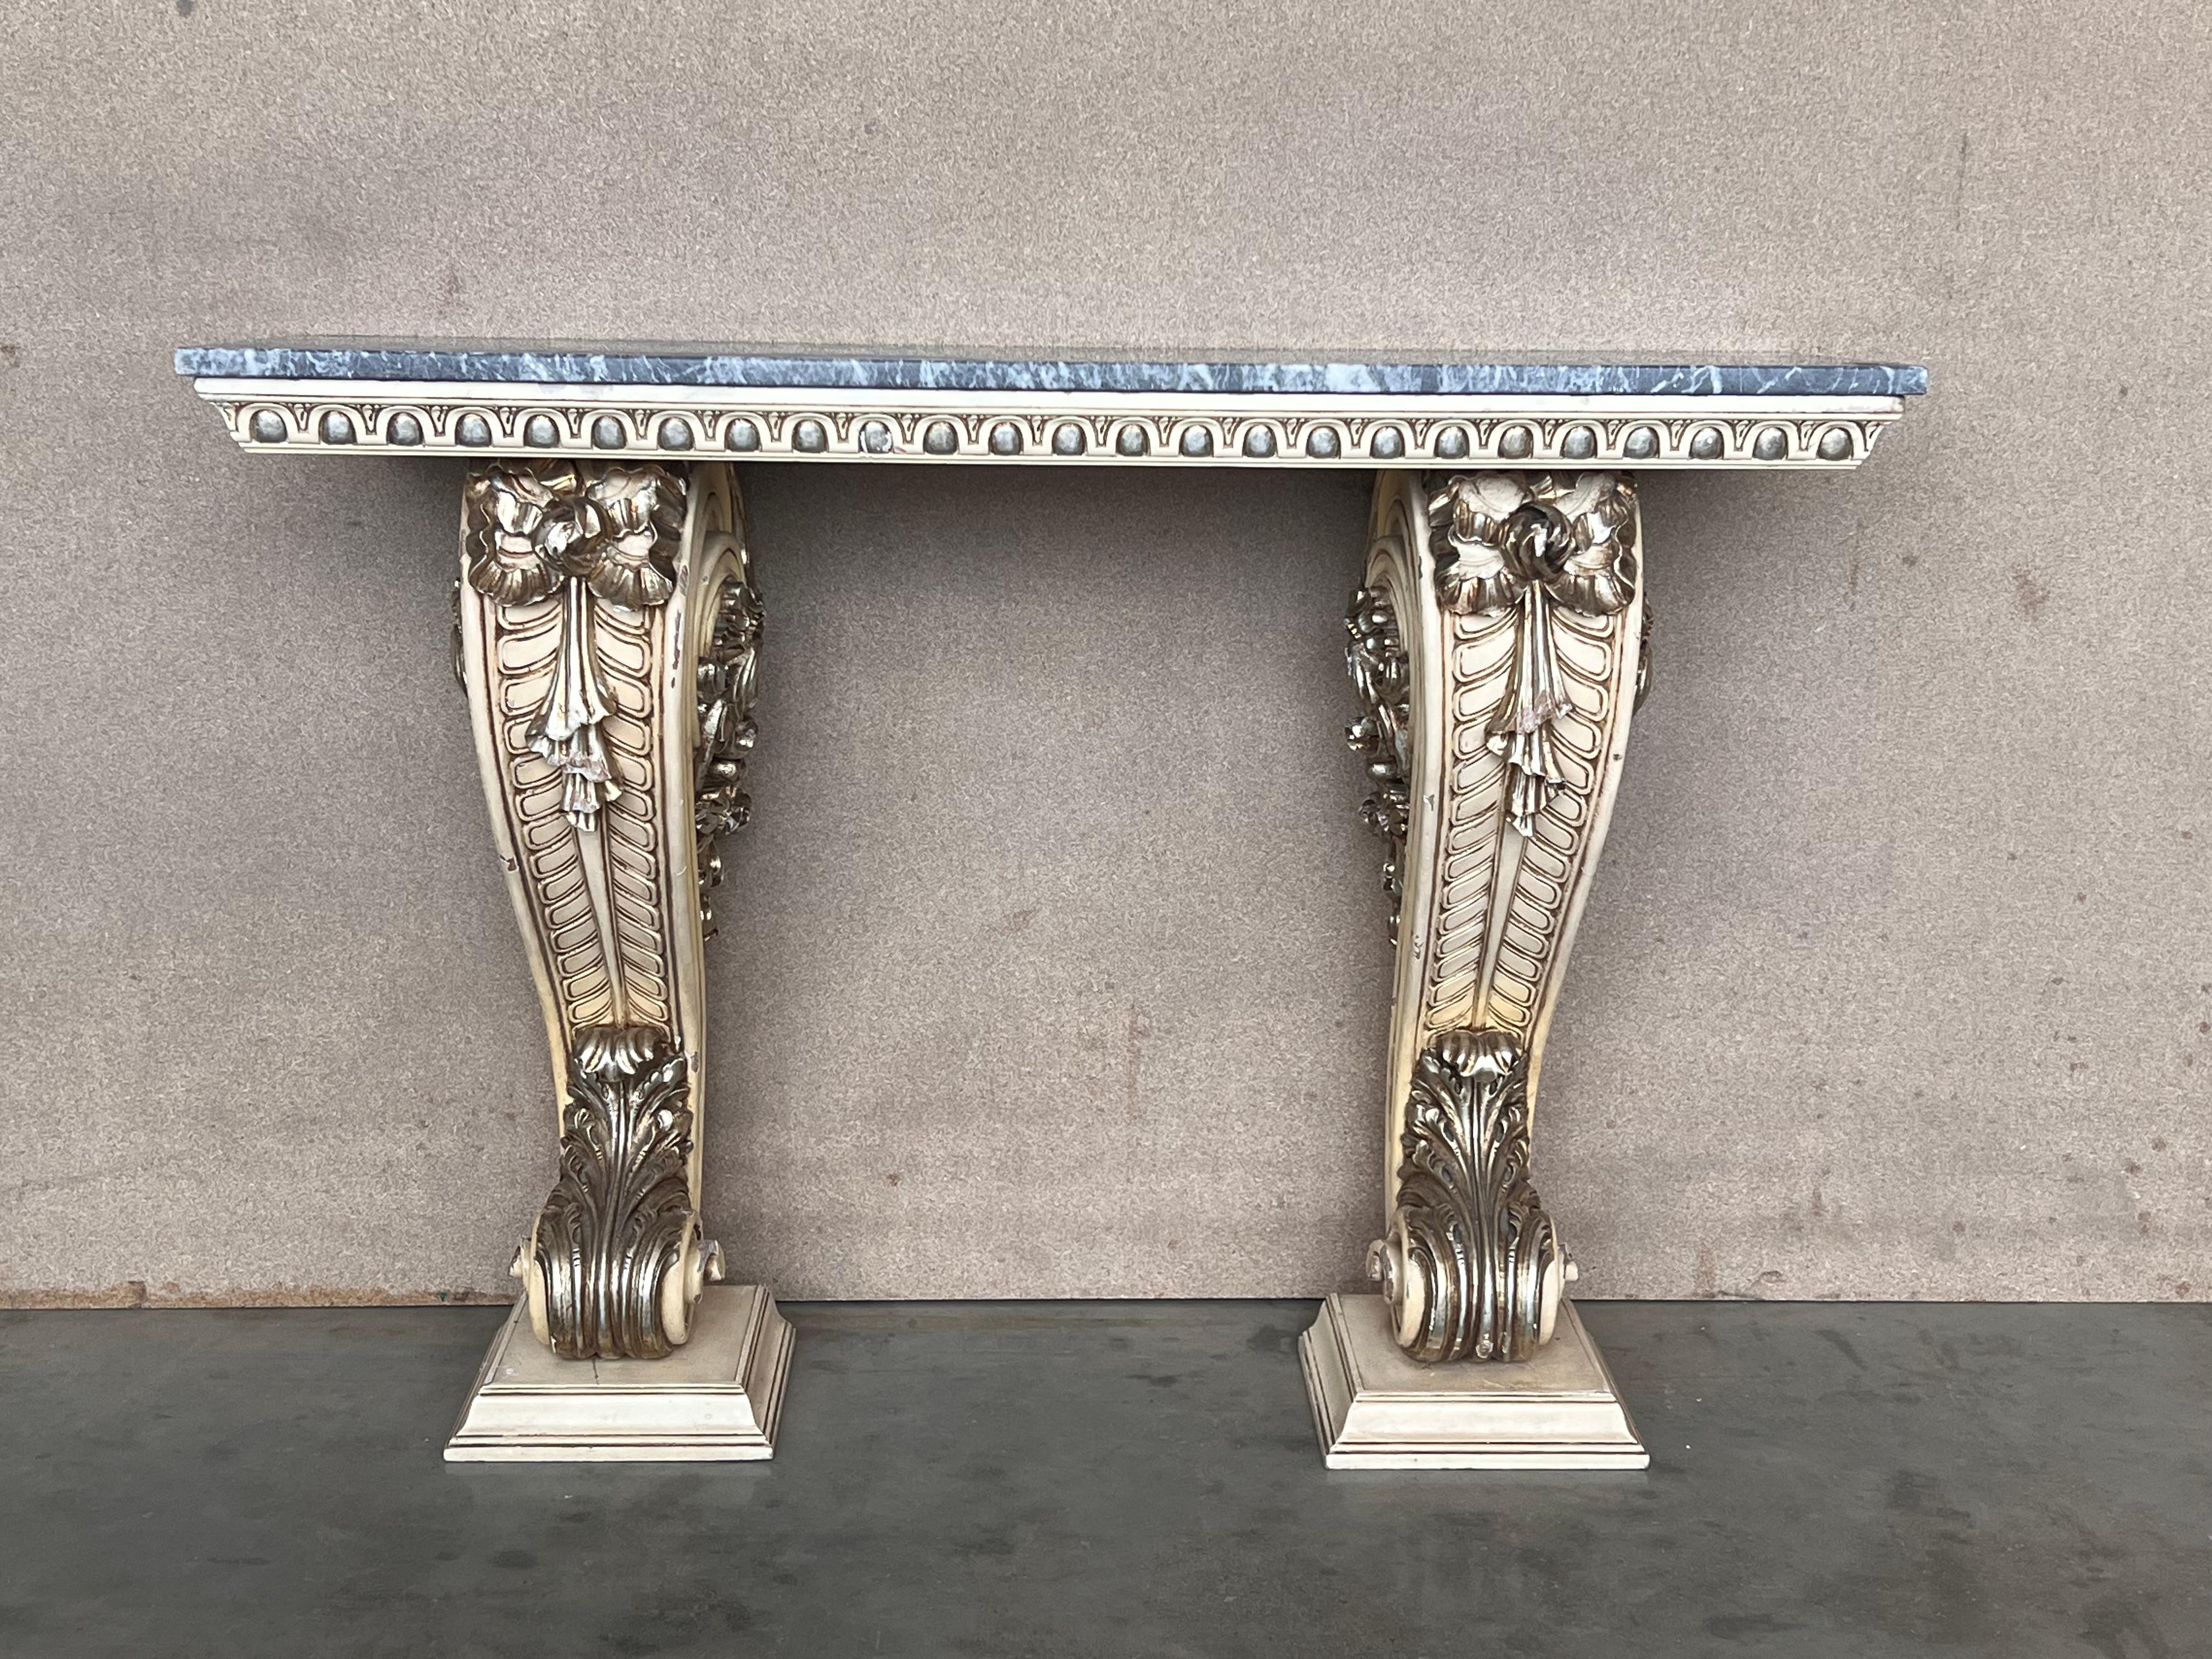 Dramatic Hollywood Regency Palm Leaf console lacquered in eye catching almond latte lacquer with a beveled edge marble top. French Riviera inspired elegance. Glamorous. Gregarious.  Palm leaf pillars emanate from a platform base like fountains. The